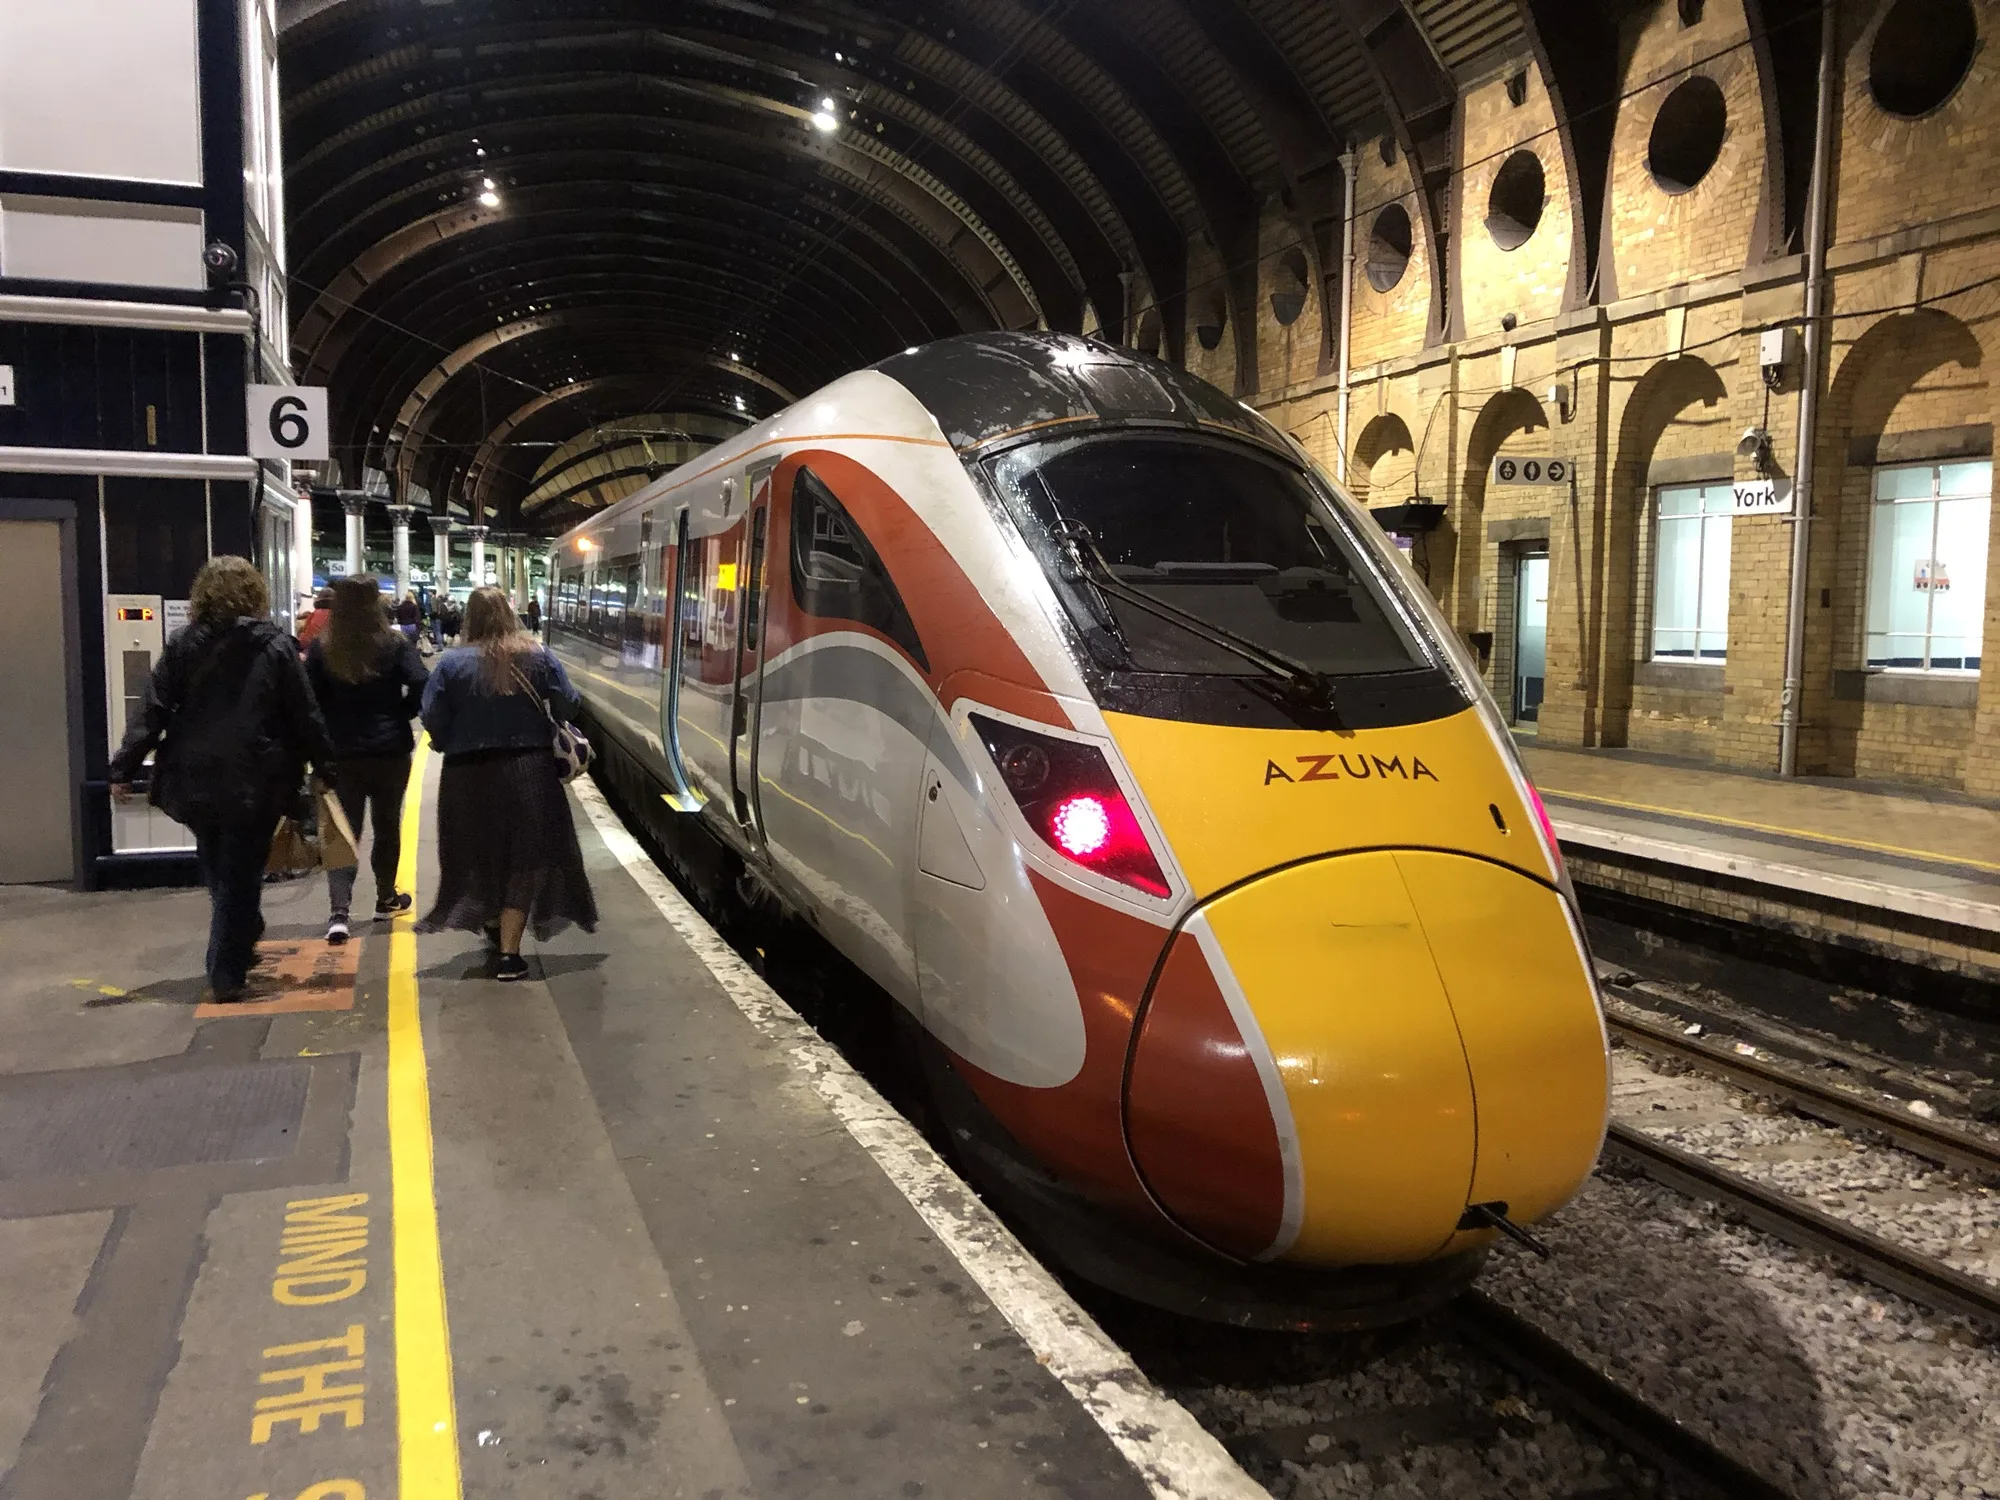 An LNER Azuma train at York station, due to depart to London King's Cross station